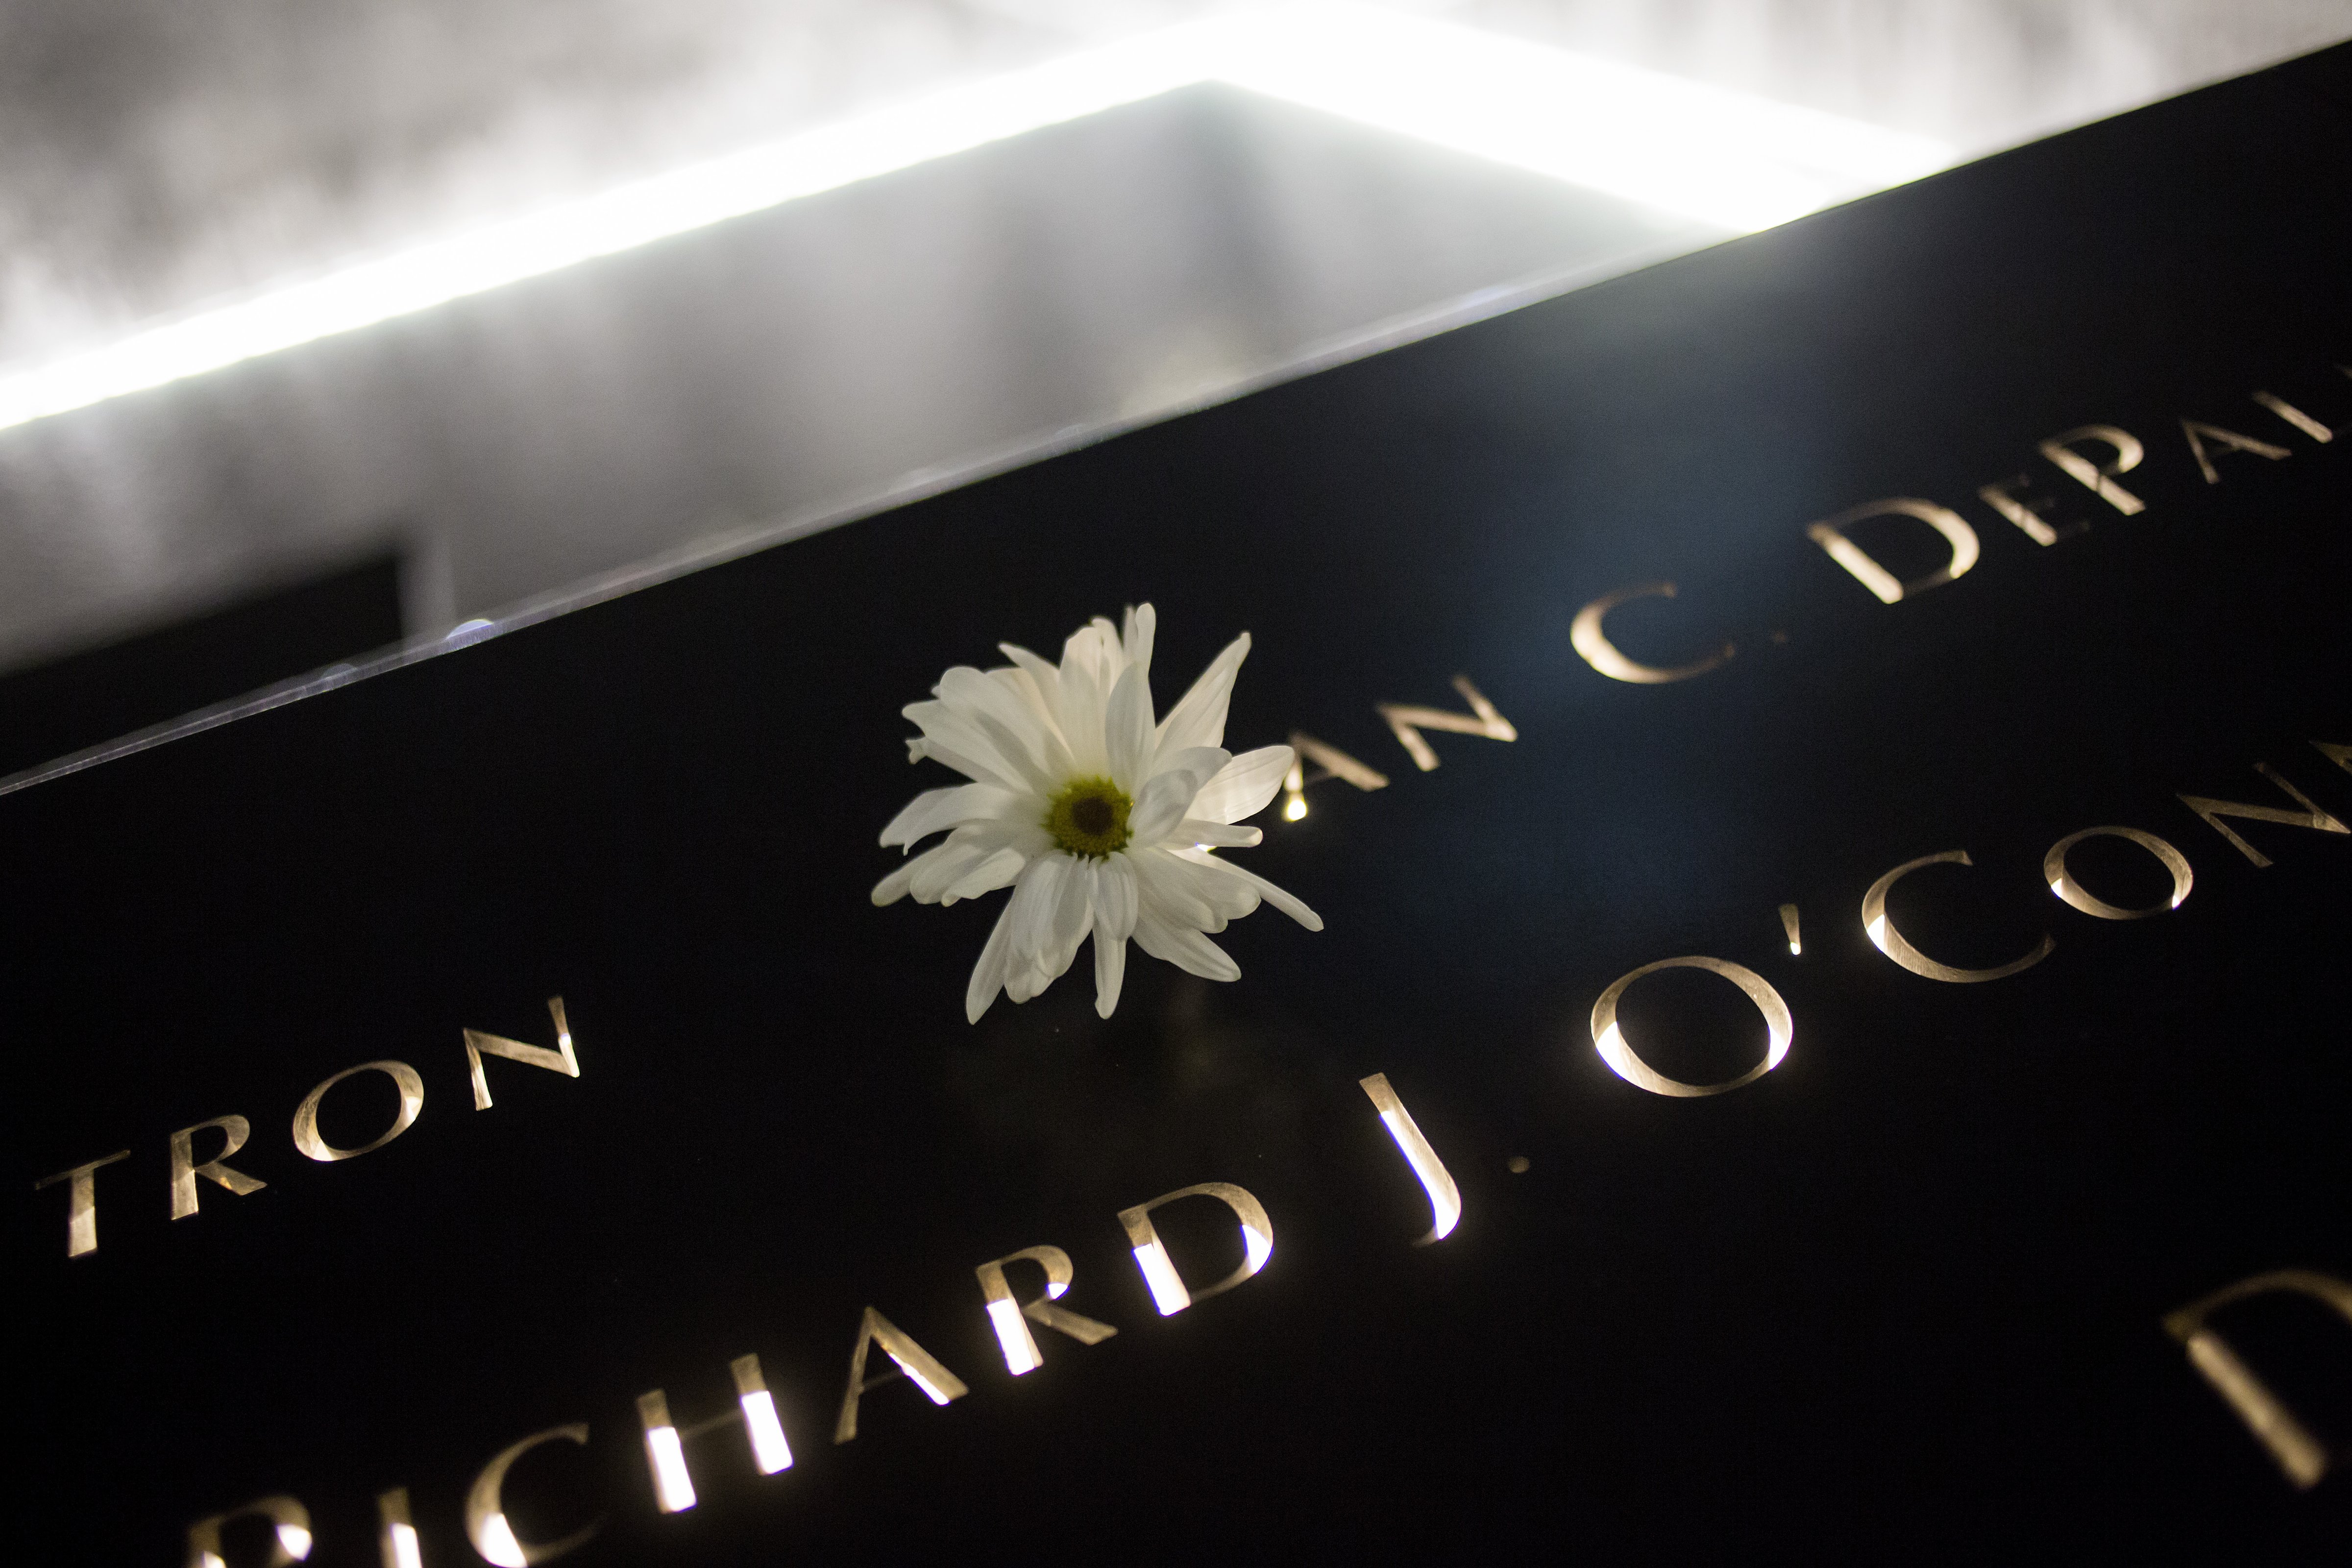 A flower is left at the 9/11 Memorial September 11, 2014 in New York City. This year marks the 13th anniversary of the September 11th terrorist attacks that killed nearly 3,000 people at the World Trade Center, Pentagon and on Flight 93. (Eric Thayer—Getty Images)